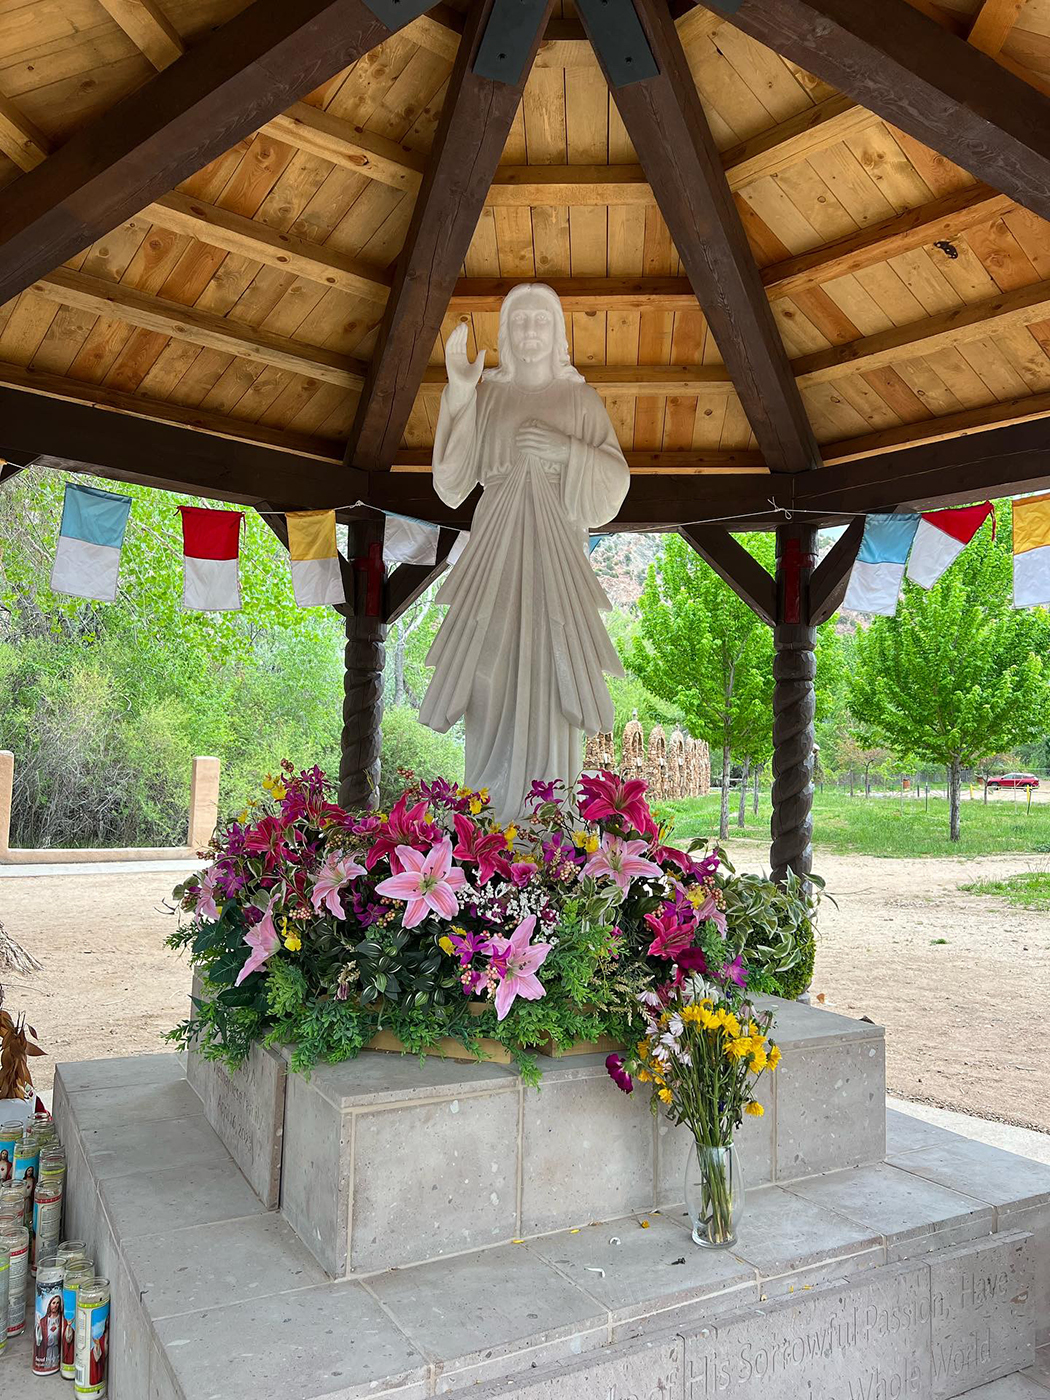 Statue surrounded by flowers and candles in Taos, NM.